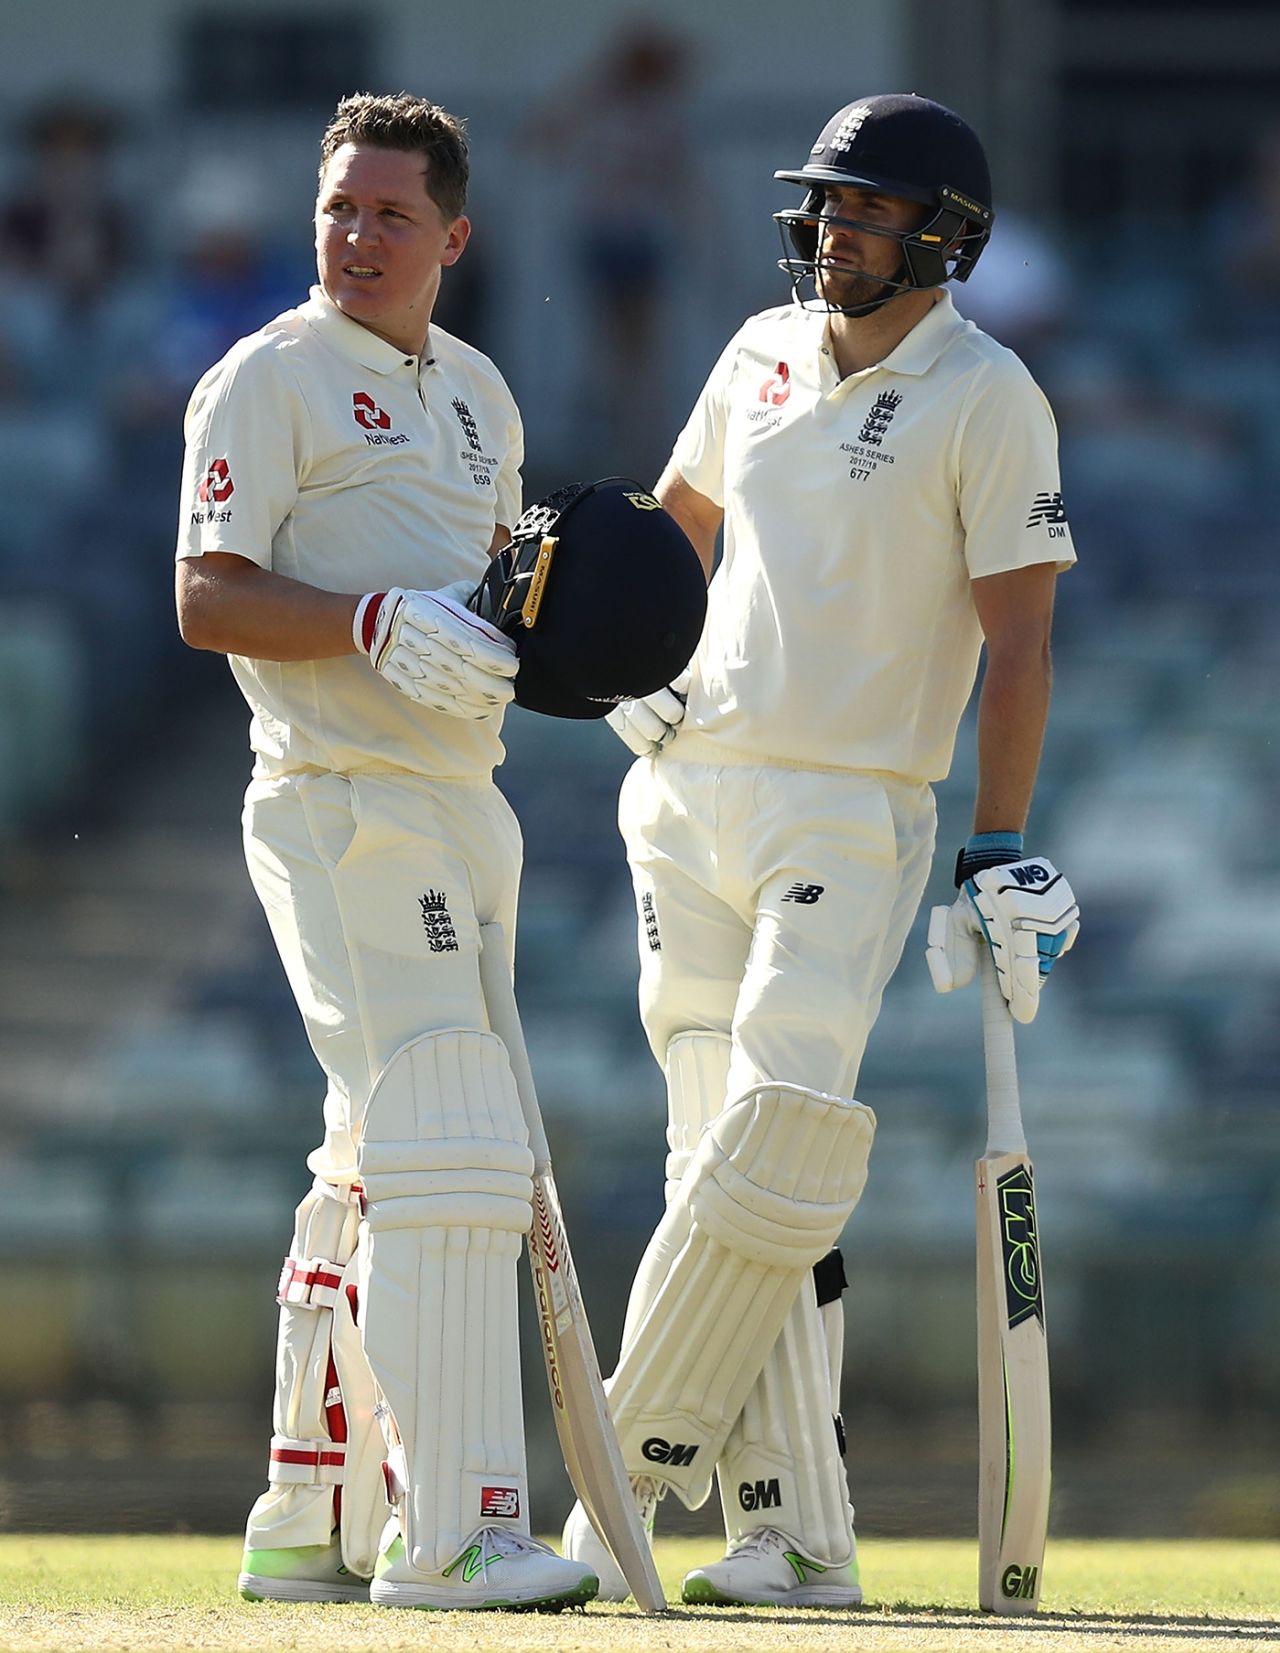 Gary Ballance and Dawid Malan take a breather between overs, Western Australia XI v England, tour match, 1st day, Perth, November 4 2017